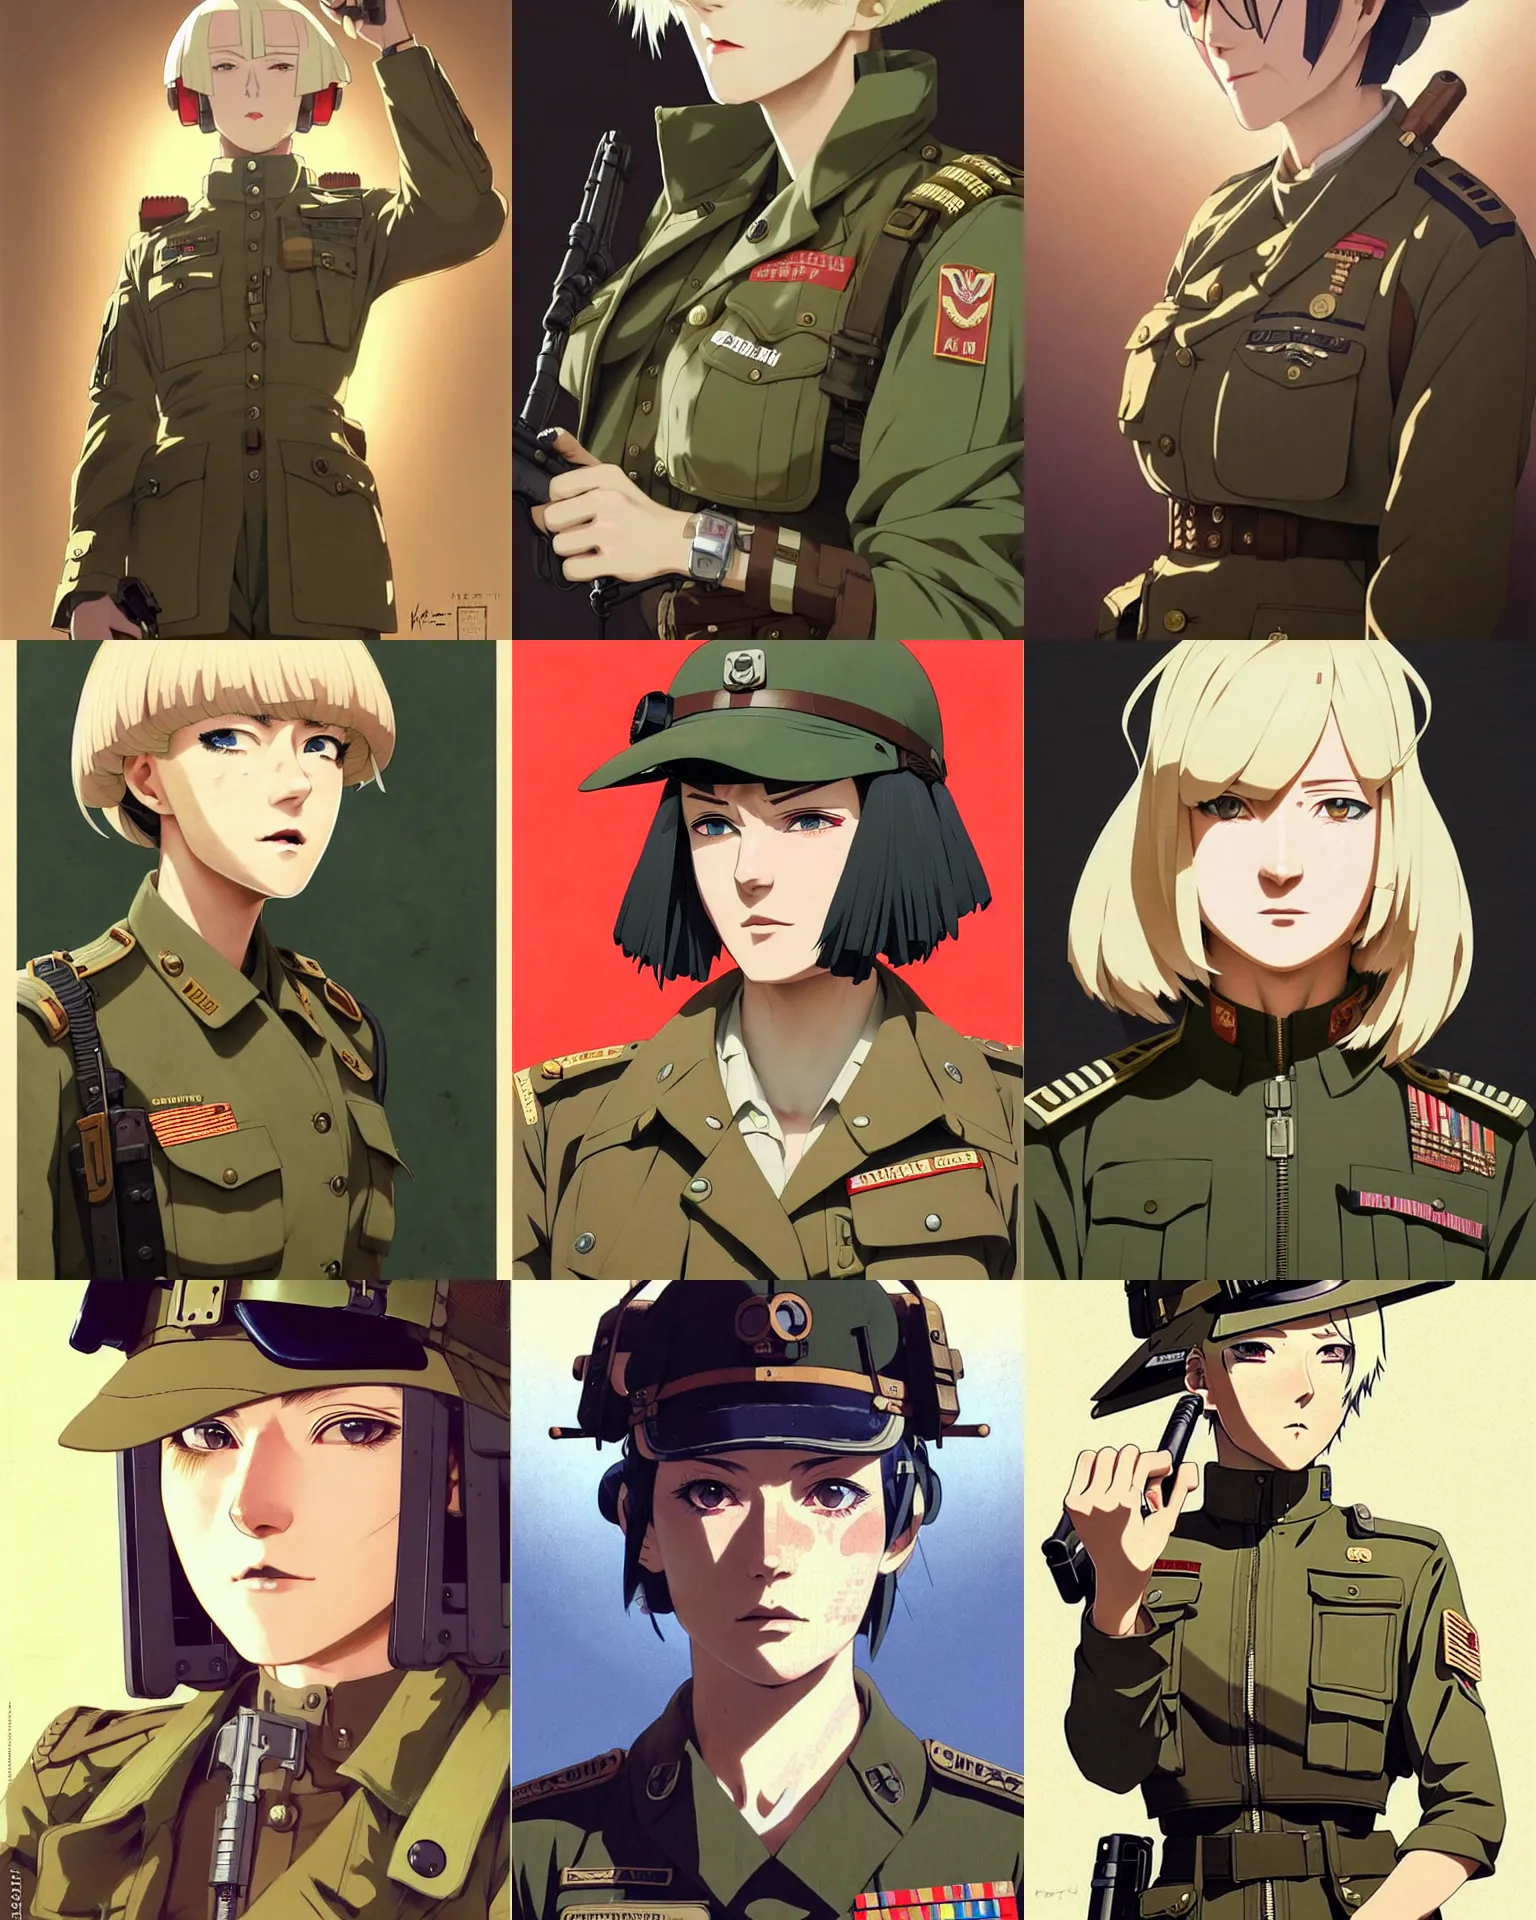 Prompt: An older dieselpunk woman in military fatigues || VERY VERY ANIME!!!, fine-face, blonde hair, realistic shaded Perfect face, fine details. Anime. realistic shaded lighting poster by Ilya Kuvshinov katsuhiro otomo ghost-in-the-shell, magali villeneuve, artgerm, Jeremy Lipkin and Michael Garmash and Rob Rey